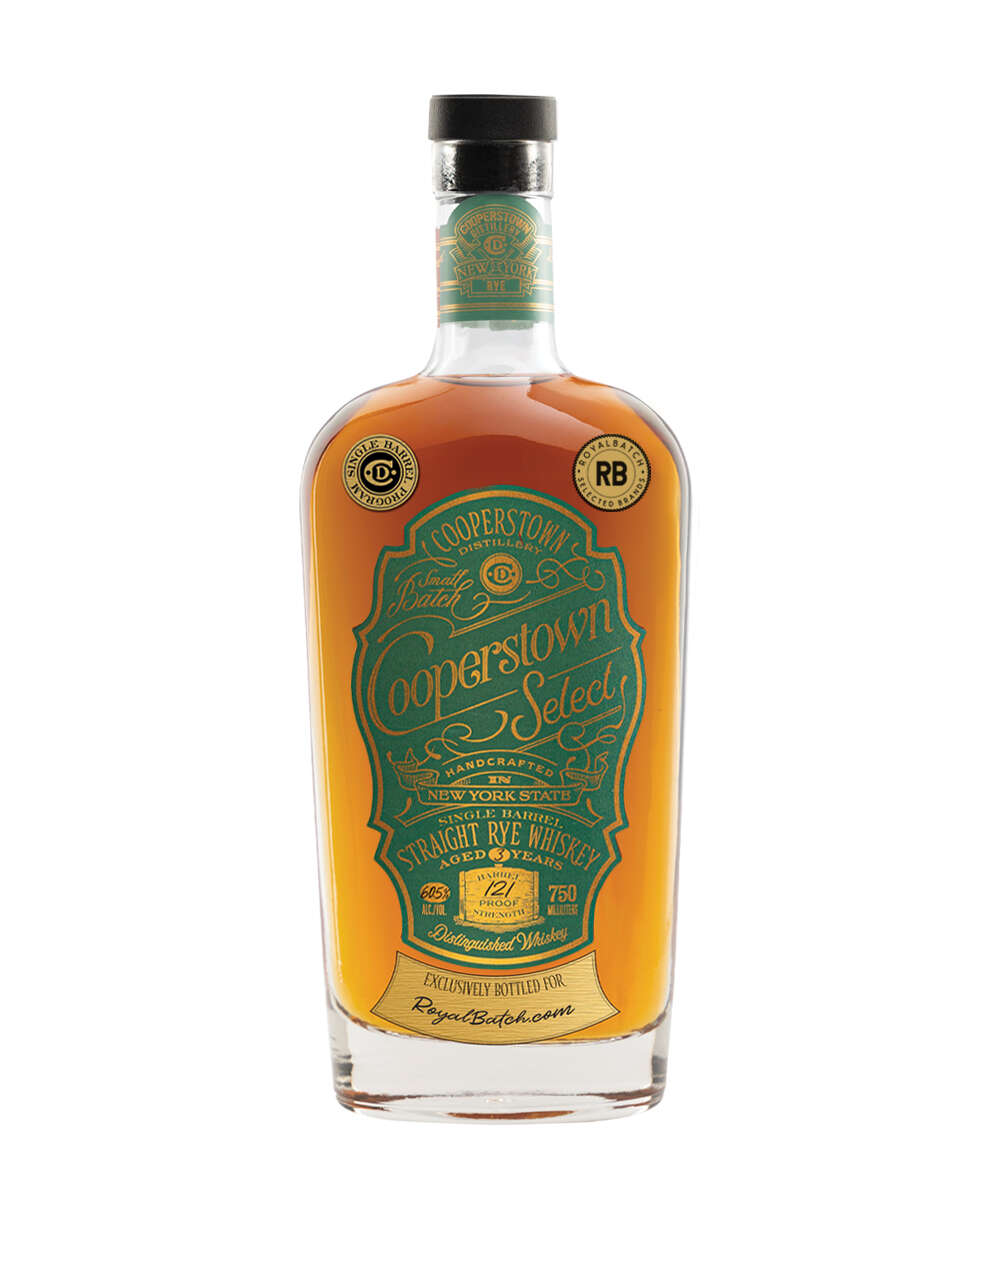 Cooperstown Select Rye Whiskey 121 Proof Exclusively Crafted for ROYAL BATCH